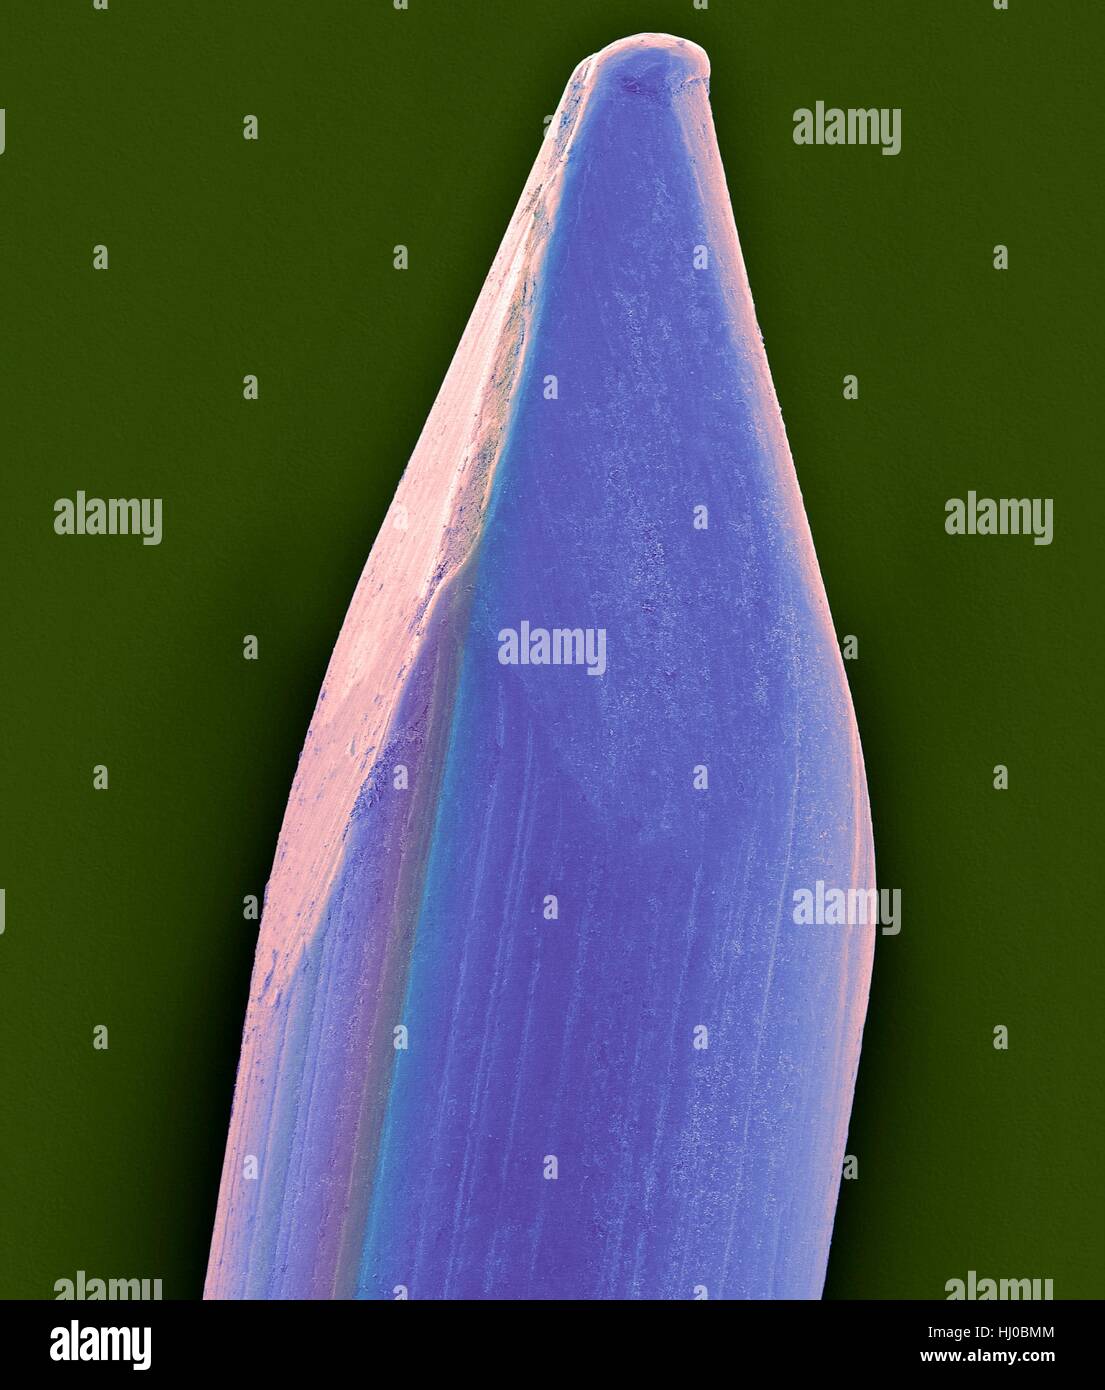 Coloured scanning electron micrograph (SEM) of Tip of finish nail.A nail is pin-shaped,sharp object of hard metal (typically steel) used as fastener.Nails for specialized purposes may also be made of stainless steel,brass or aluminium.Nails are typically driven into material (typically wood) by hammer or by nail gun.A nail holds materials together by friction in vertical direction shear strength in lateral directions.One point of nail is also sometimes bent over or clinched to prevent it from pulling out.Magnification: x8 when shortest axis printed at 25 millimetres. Stock Photo